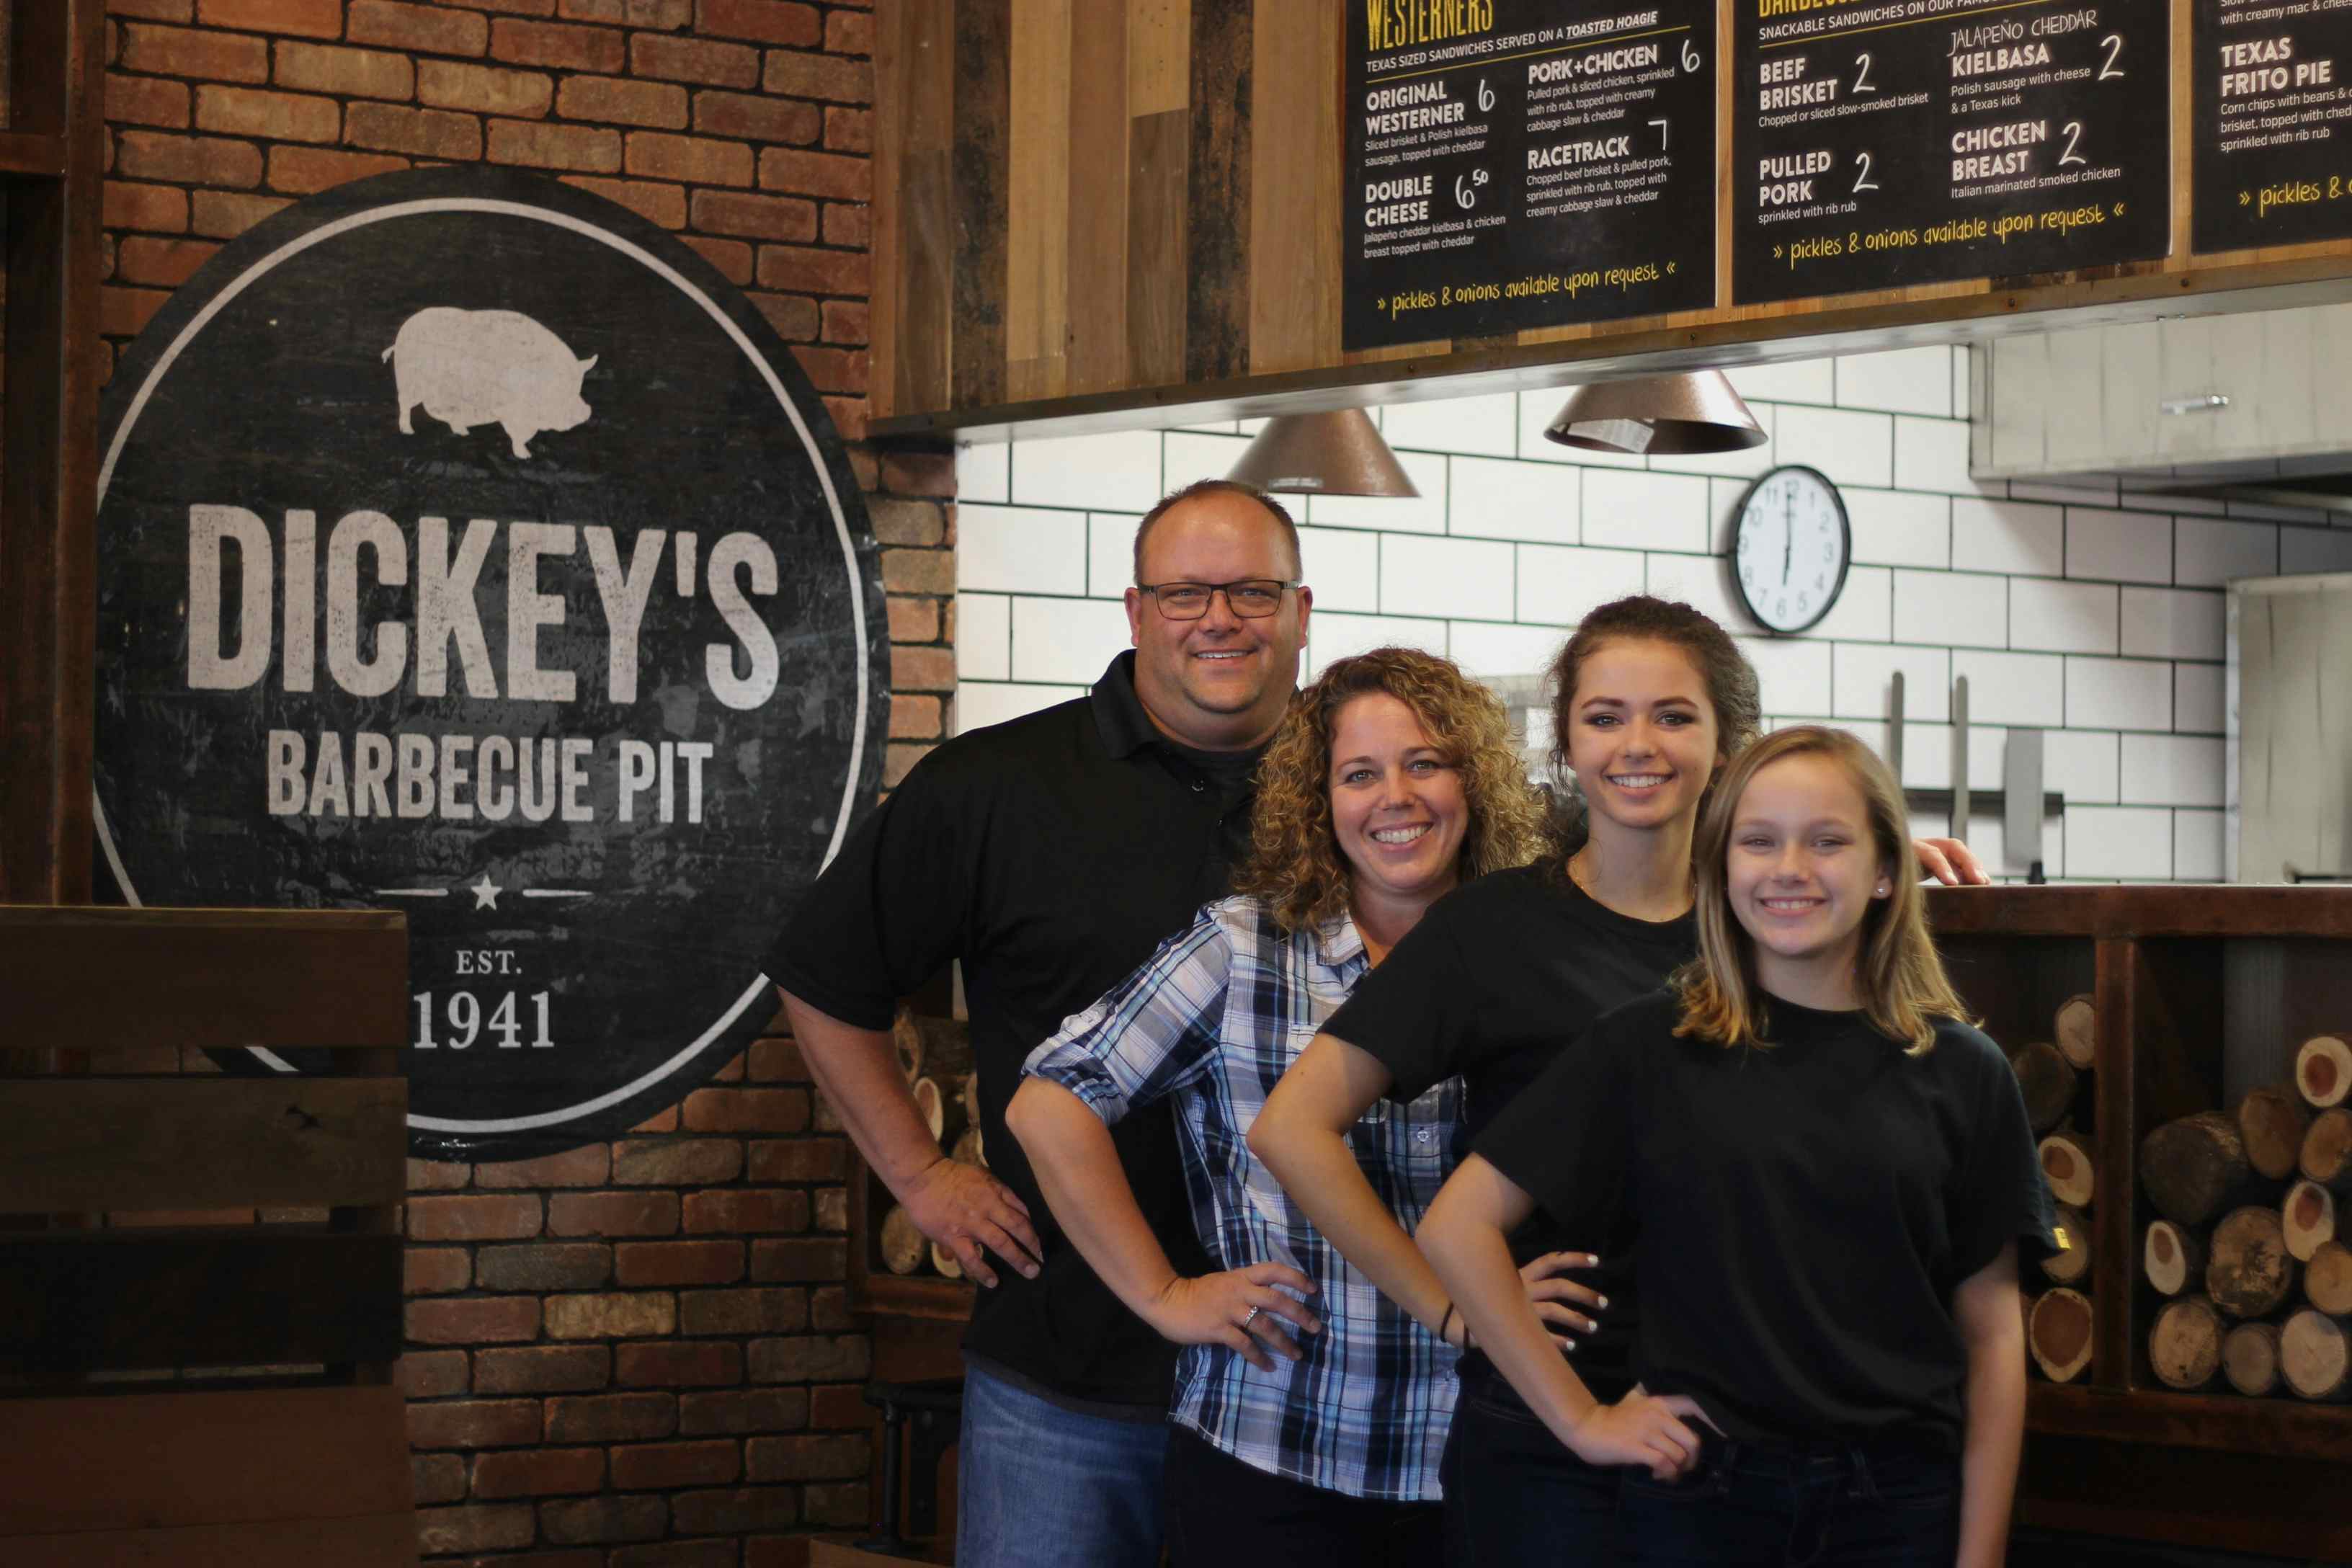 YourObserver.com: Dickey's Barbecue Pit Opens In Bradenton